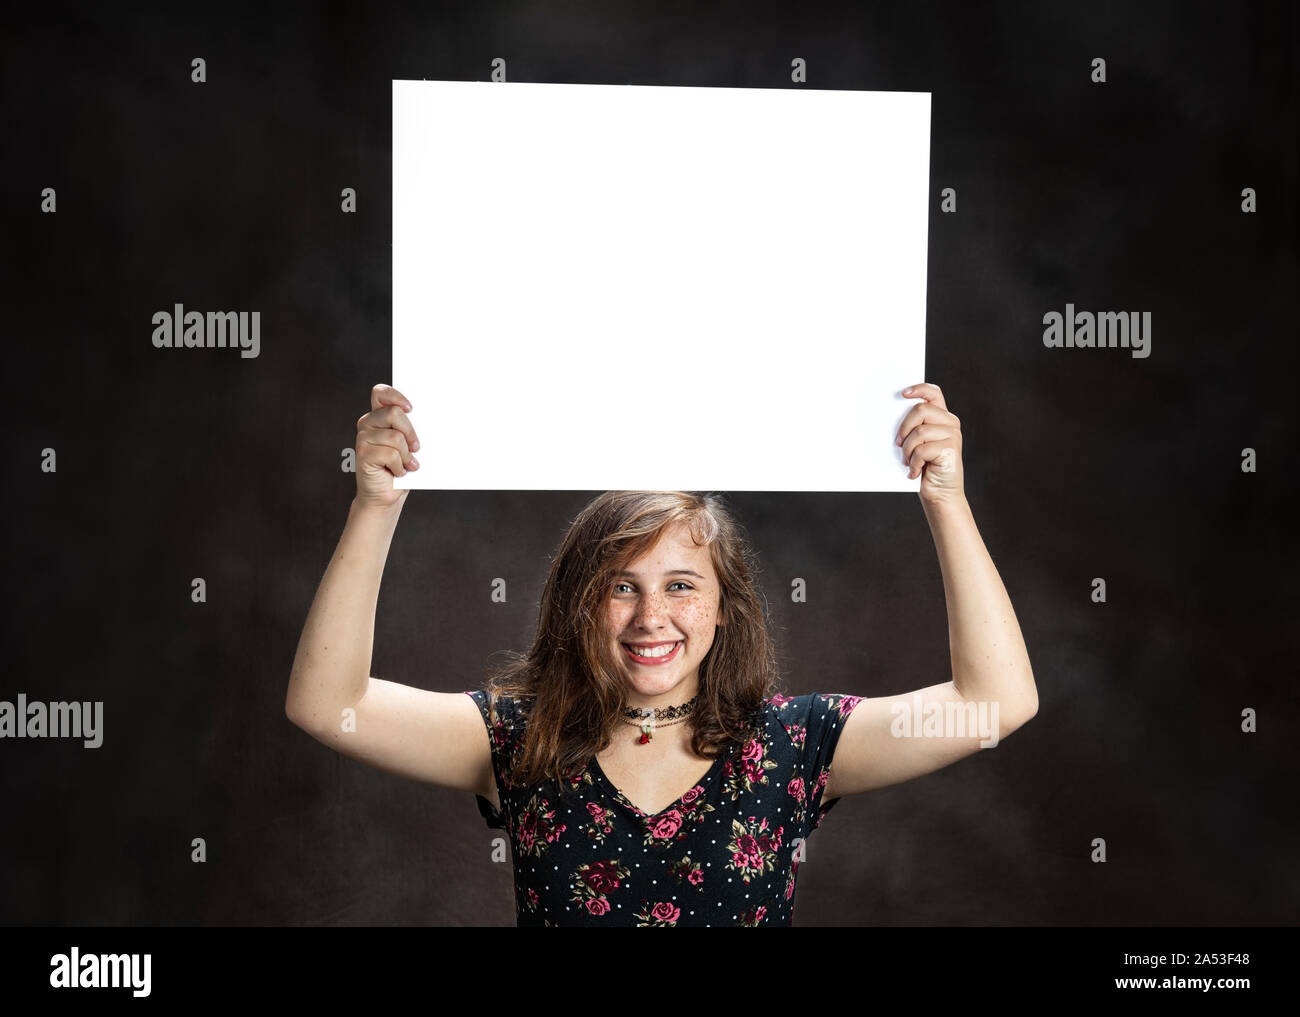 Horizontal studio shot of a happy pre-teen girl with freckles holding a blank white sign on her head on a brown background. Stock Photo